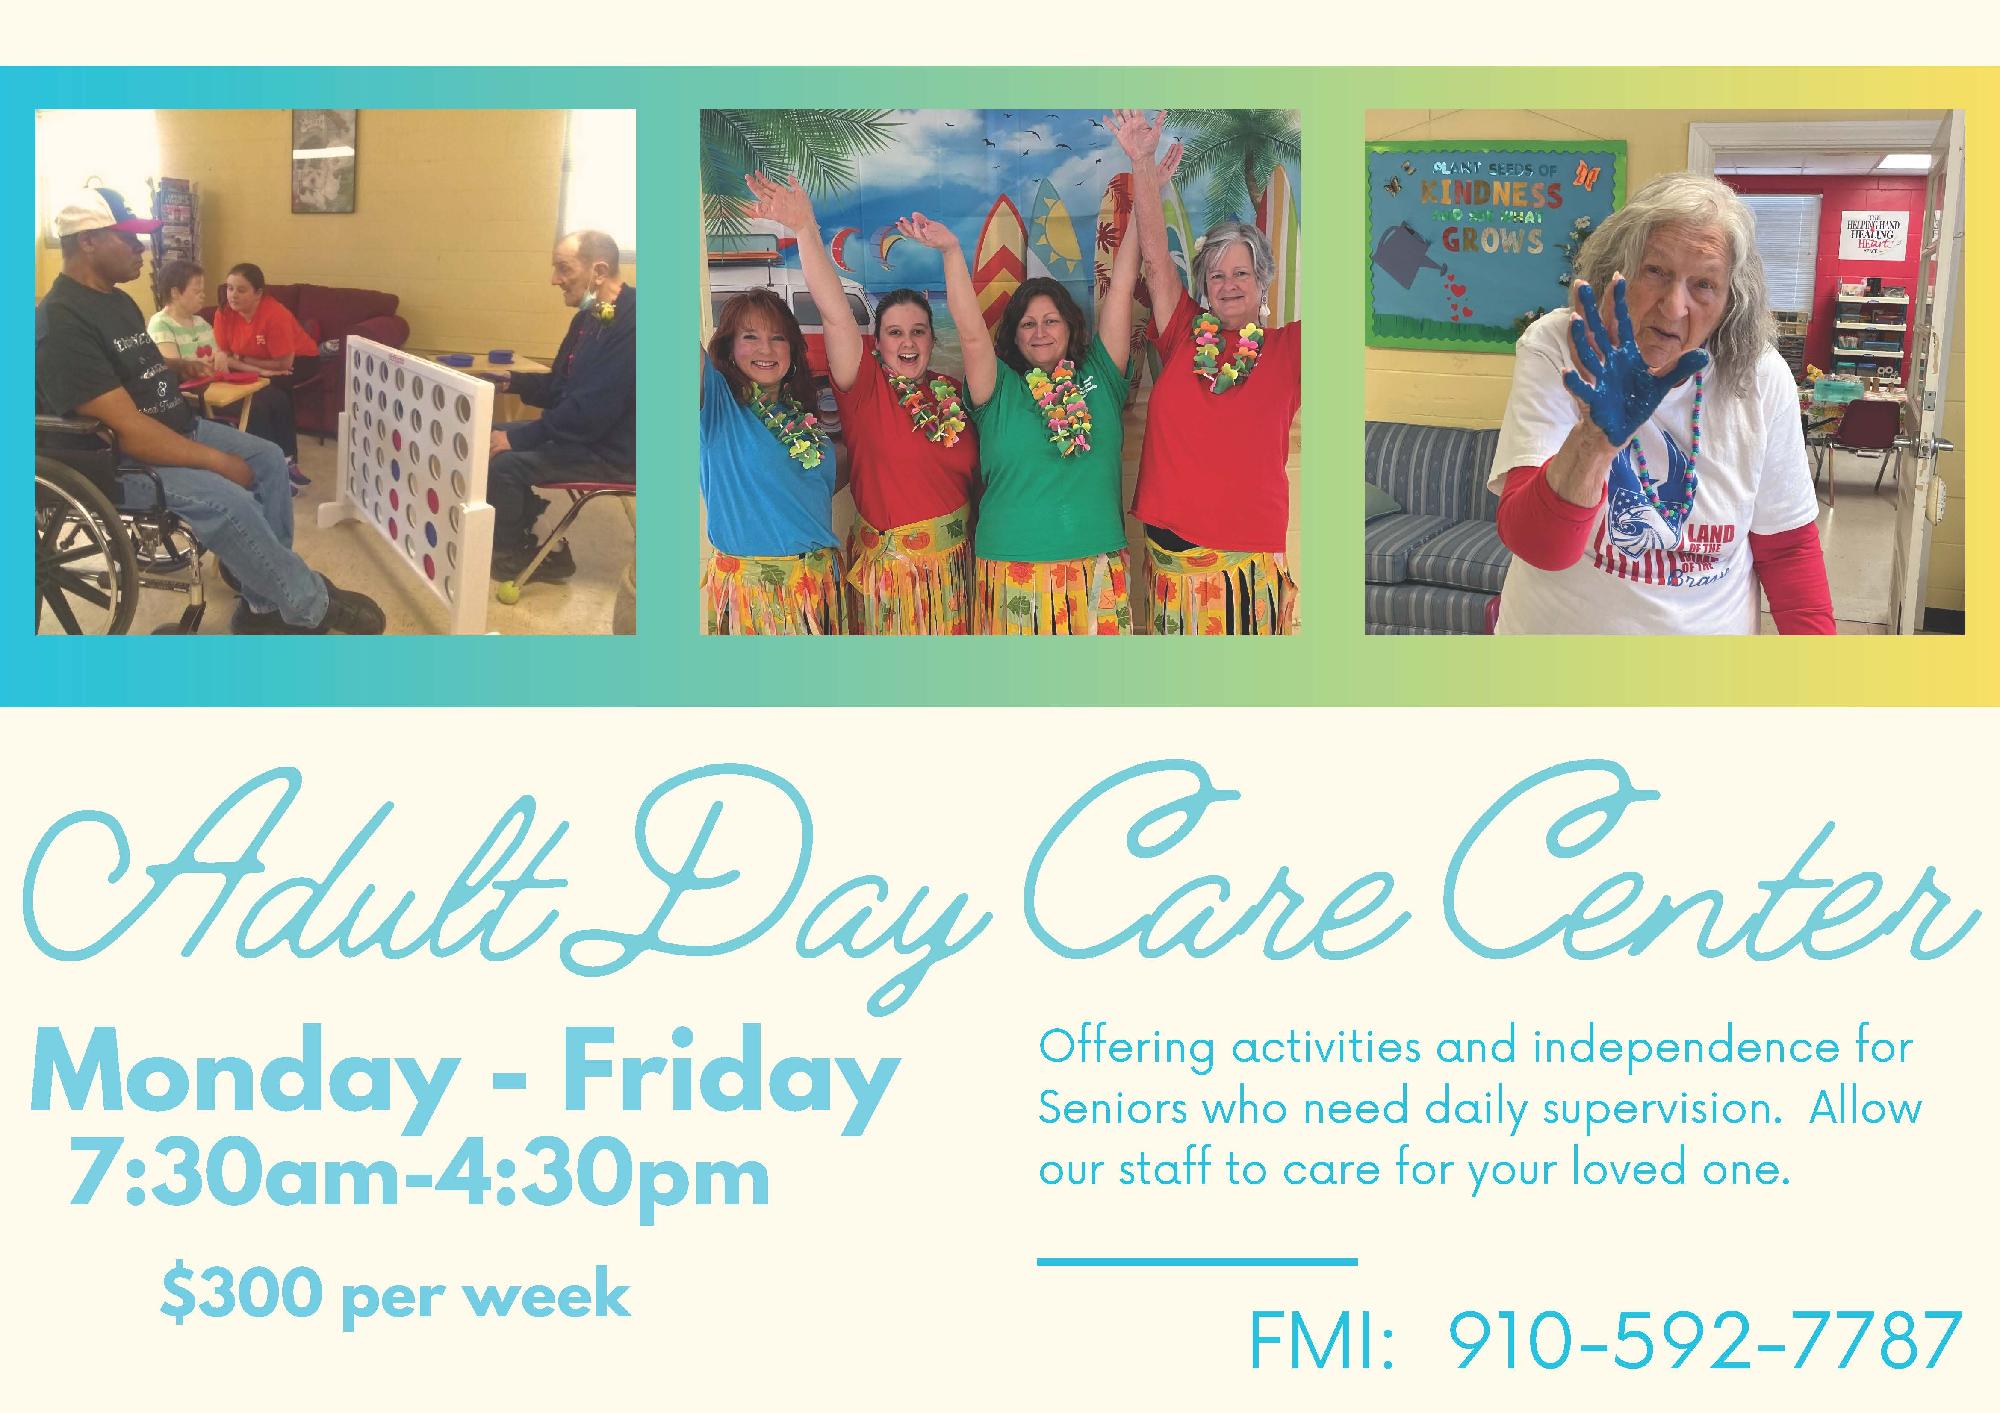 Adult Day Care Center, Monday-Friday 7:30am-4:30pm, $300 per week. Offering activities and independence for Seniors who need daily supervision. Allow our staff to care for your loved one. FMI: 910-592-7787